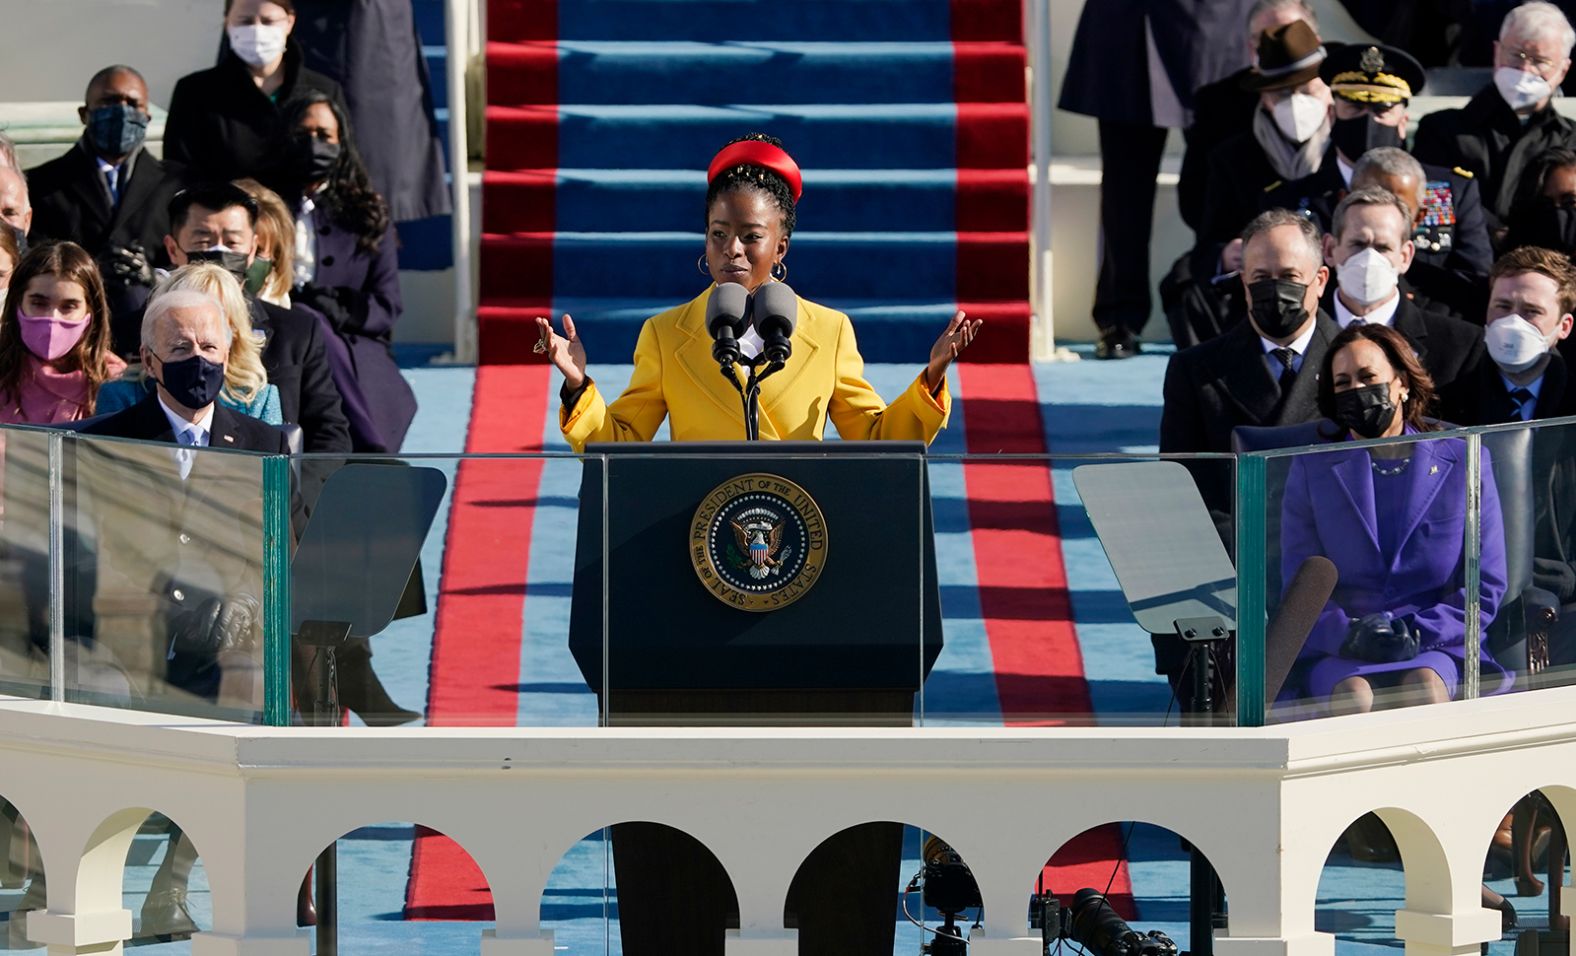 Amanda Gorman, the nation's first-ever youth poet laureate, <a href="index.php?page=&url=https%3A%2F%2Fwww.cnn.com%2Fpolitics%2Flive-news%2Fbiden-harris-inauguration-day-2021%2Fh_5818ddd1619fe02d7f3b2b30bdfaf331" target="_blank">delivered a message of resilience</a> at the inauguration. "We will not march back to what was, but move to what shall be: a country that is bruised but whole, benevolent but bold, fierce and free," she said. "We will not be turned around or interrupted by intimidation because we know our inaction and inertia will become the future."